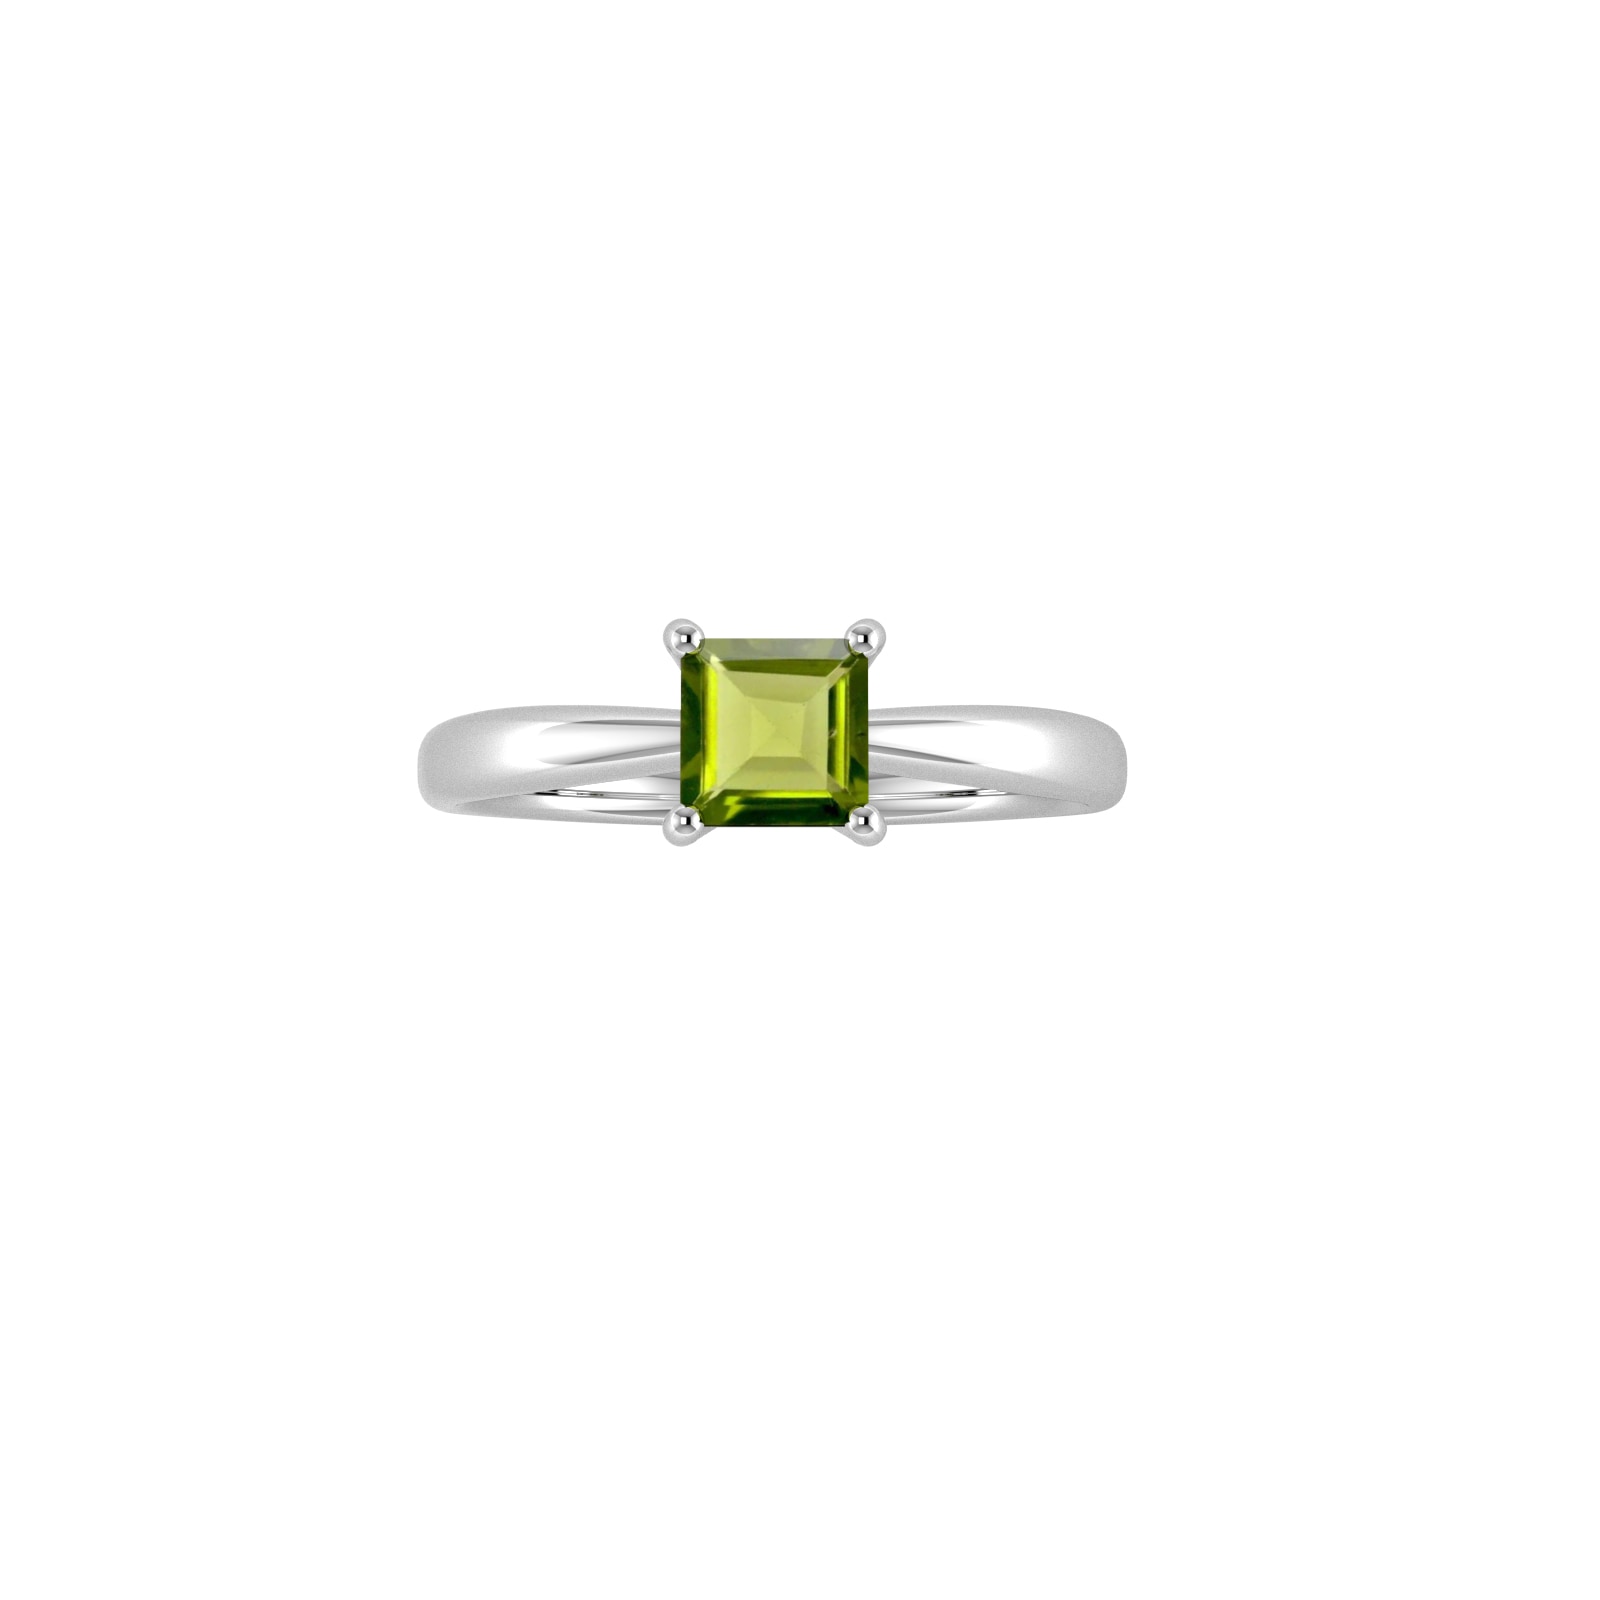 9ct White Gold 4 Claw Square Peridot 5mm x 5mm Ring- Ring Size S.5